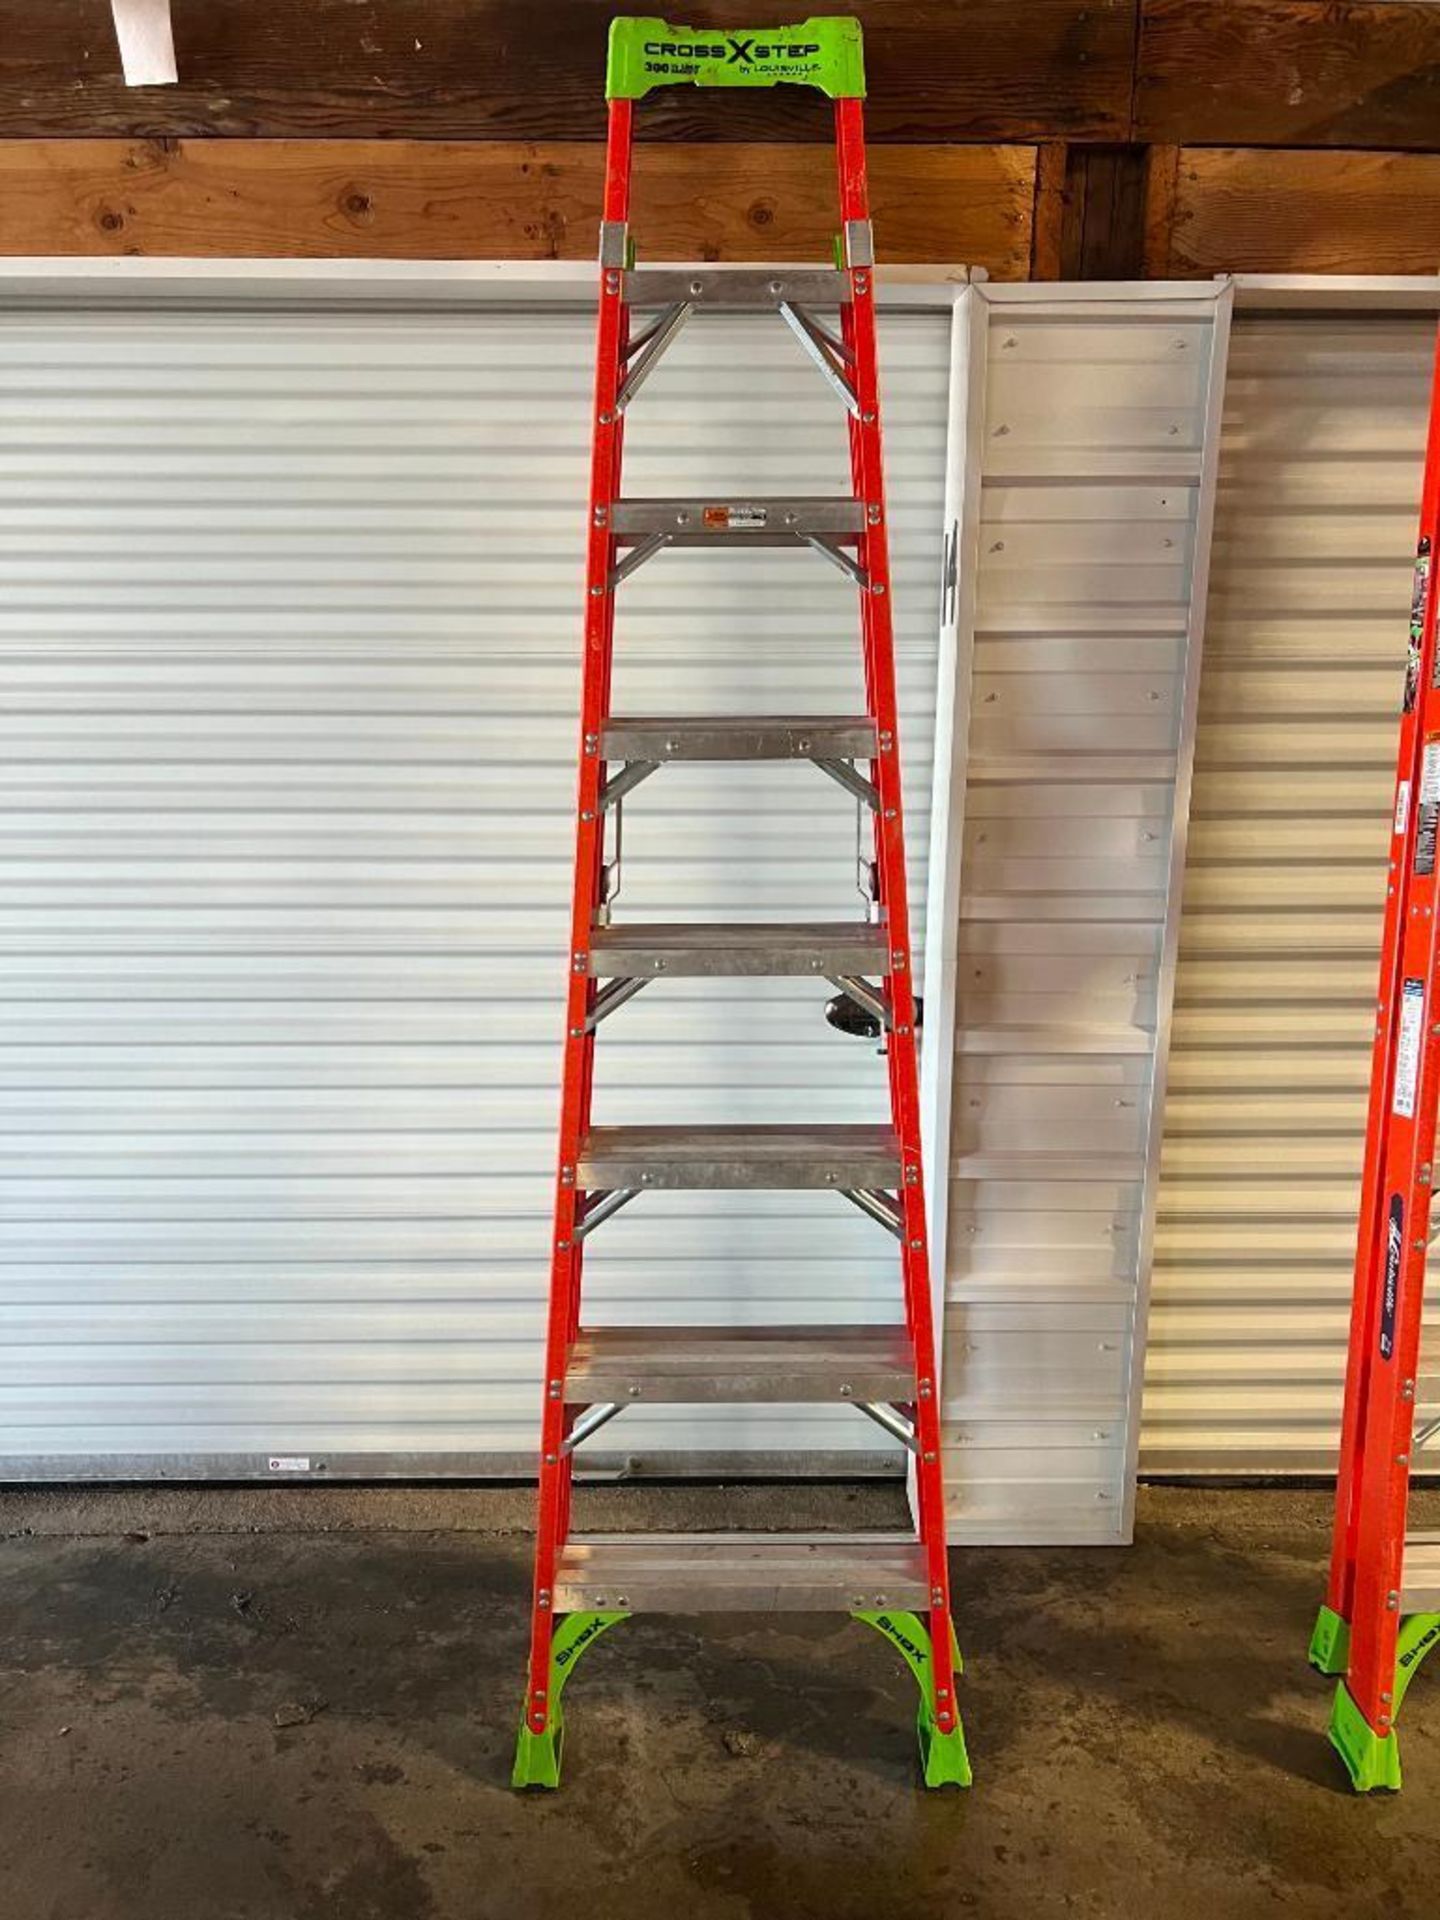 12' Louisville CrossXstep Step Ladder, Model FXS1508, 300# Load Capacity. Located in Mt. Pleasant, I - Image 3 of 5